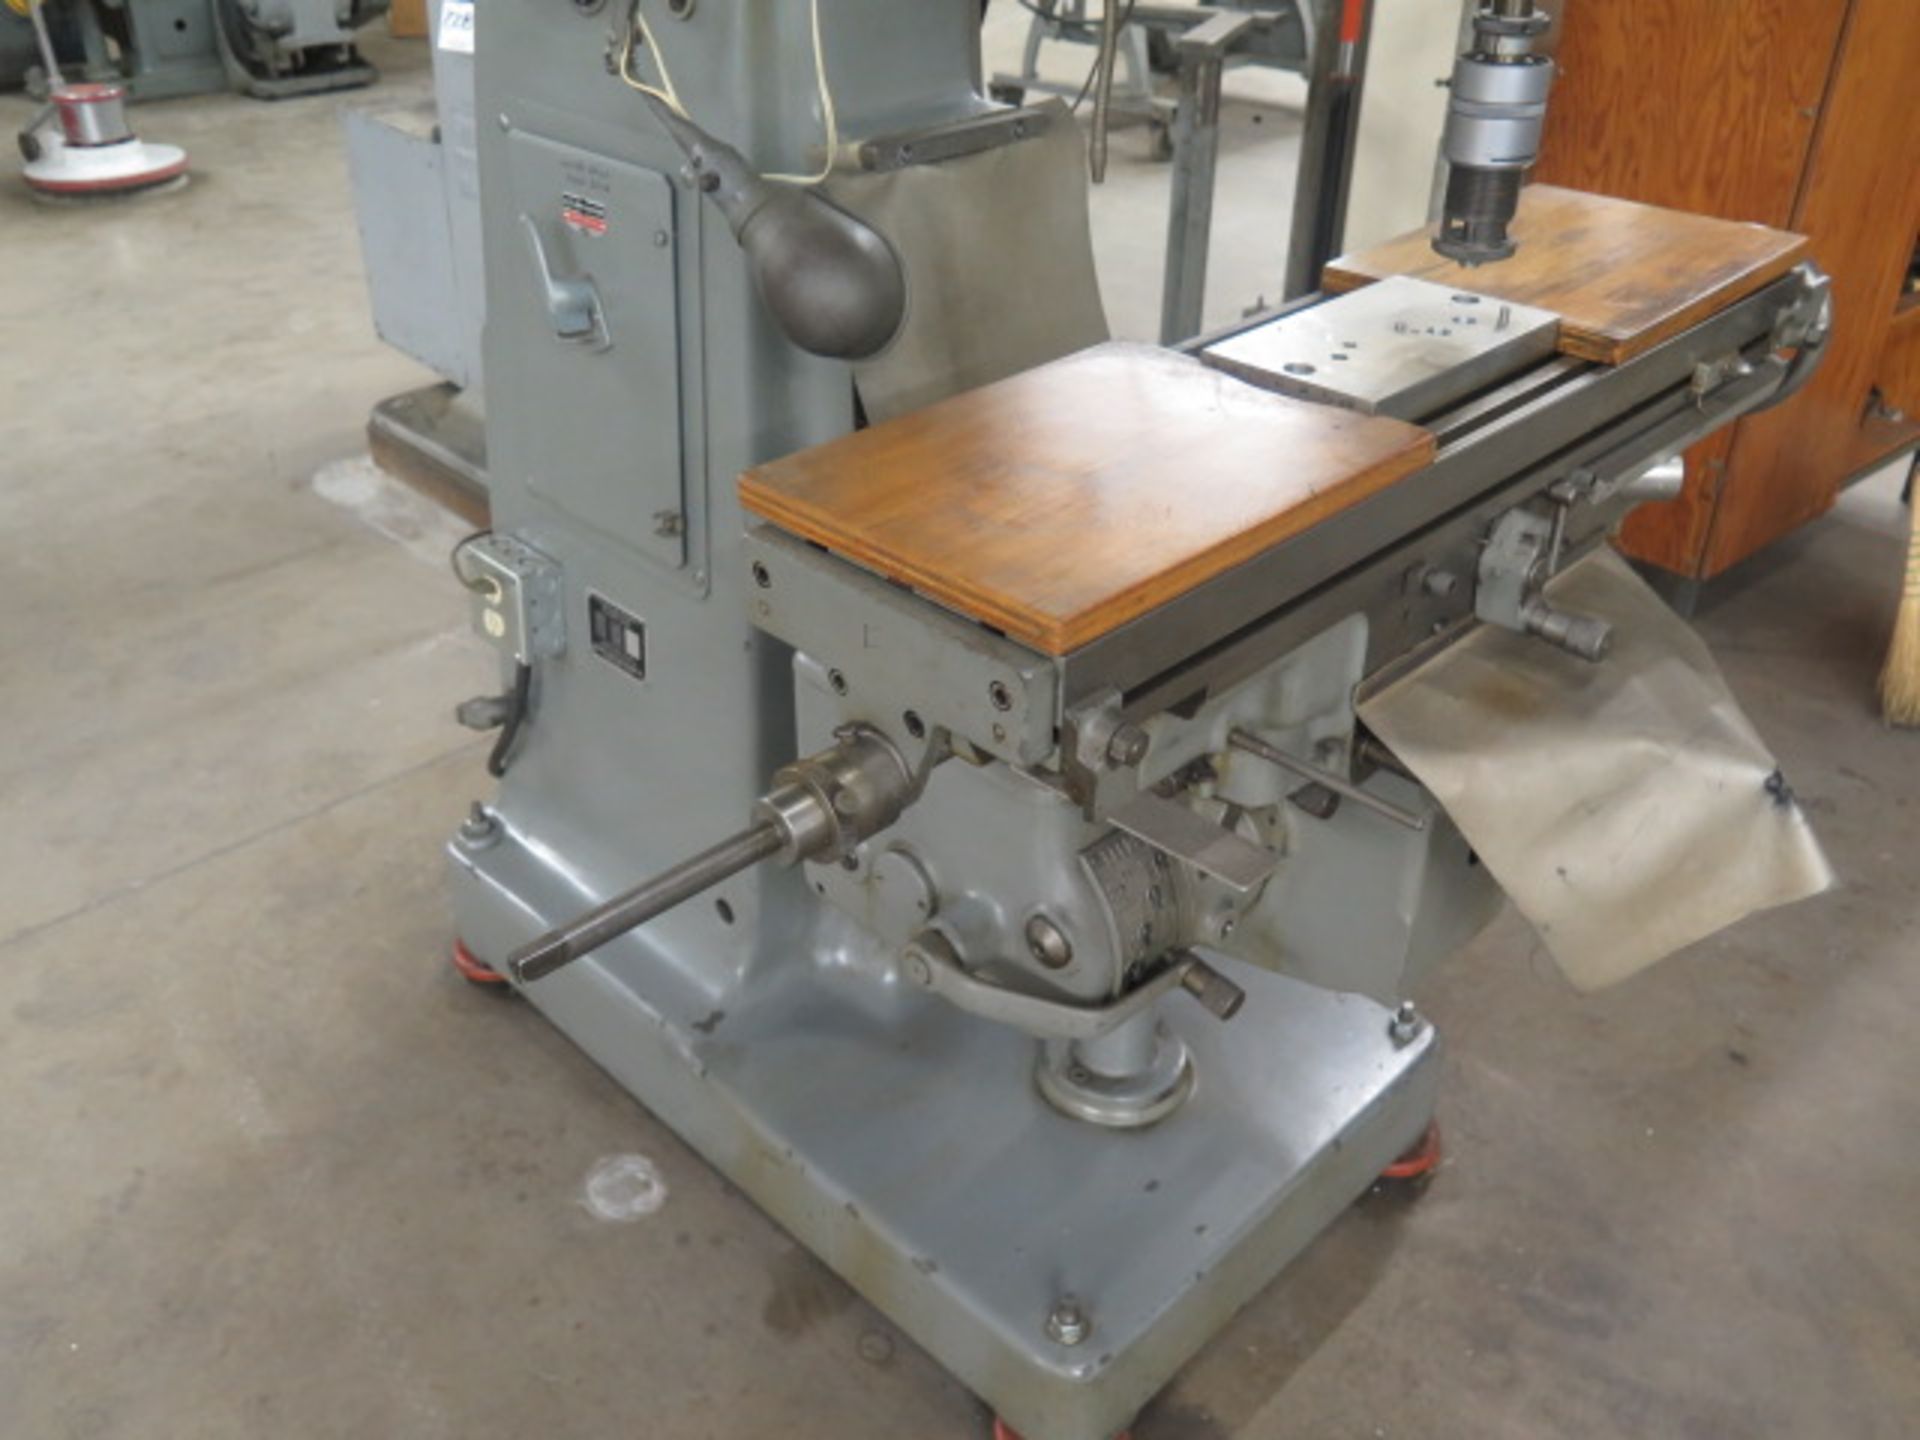 Gorton No. 8 ½ D Vertical Mill s/n 35931 w/ 2Hp Motor, 6-Speeds, Power Feeds, 9 ¼” x 34” Table - Image 4 of 8